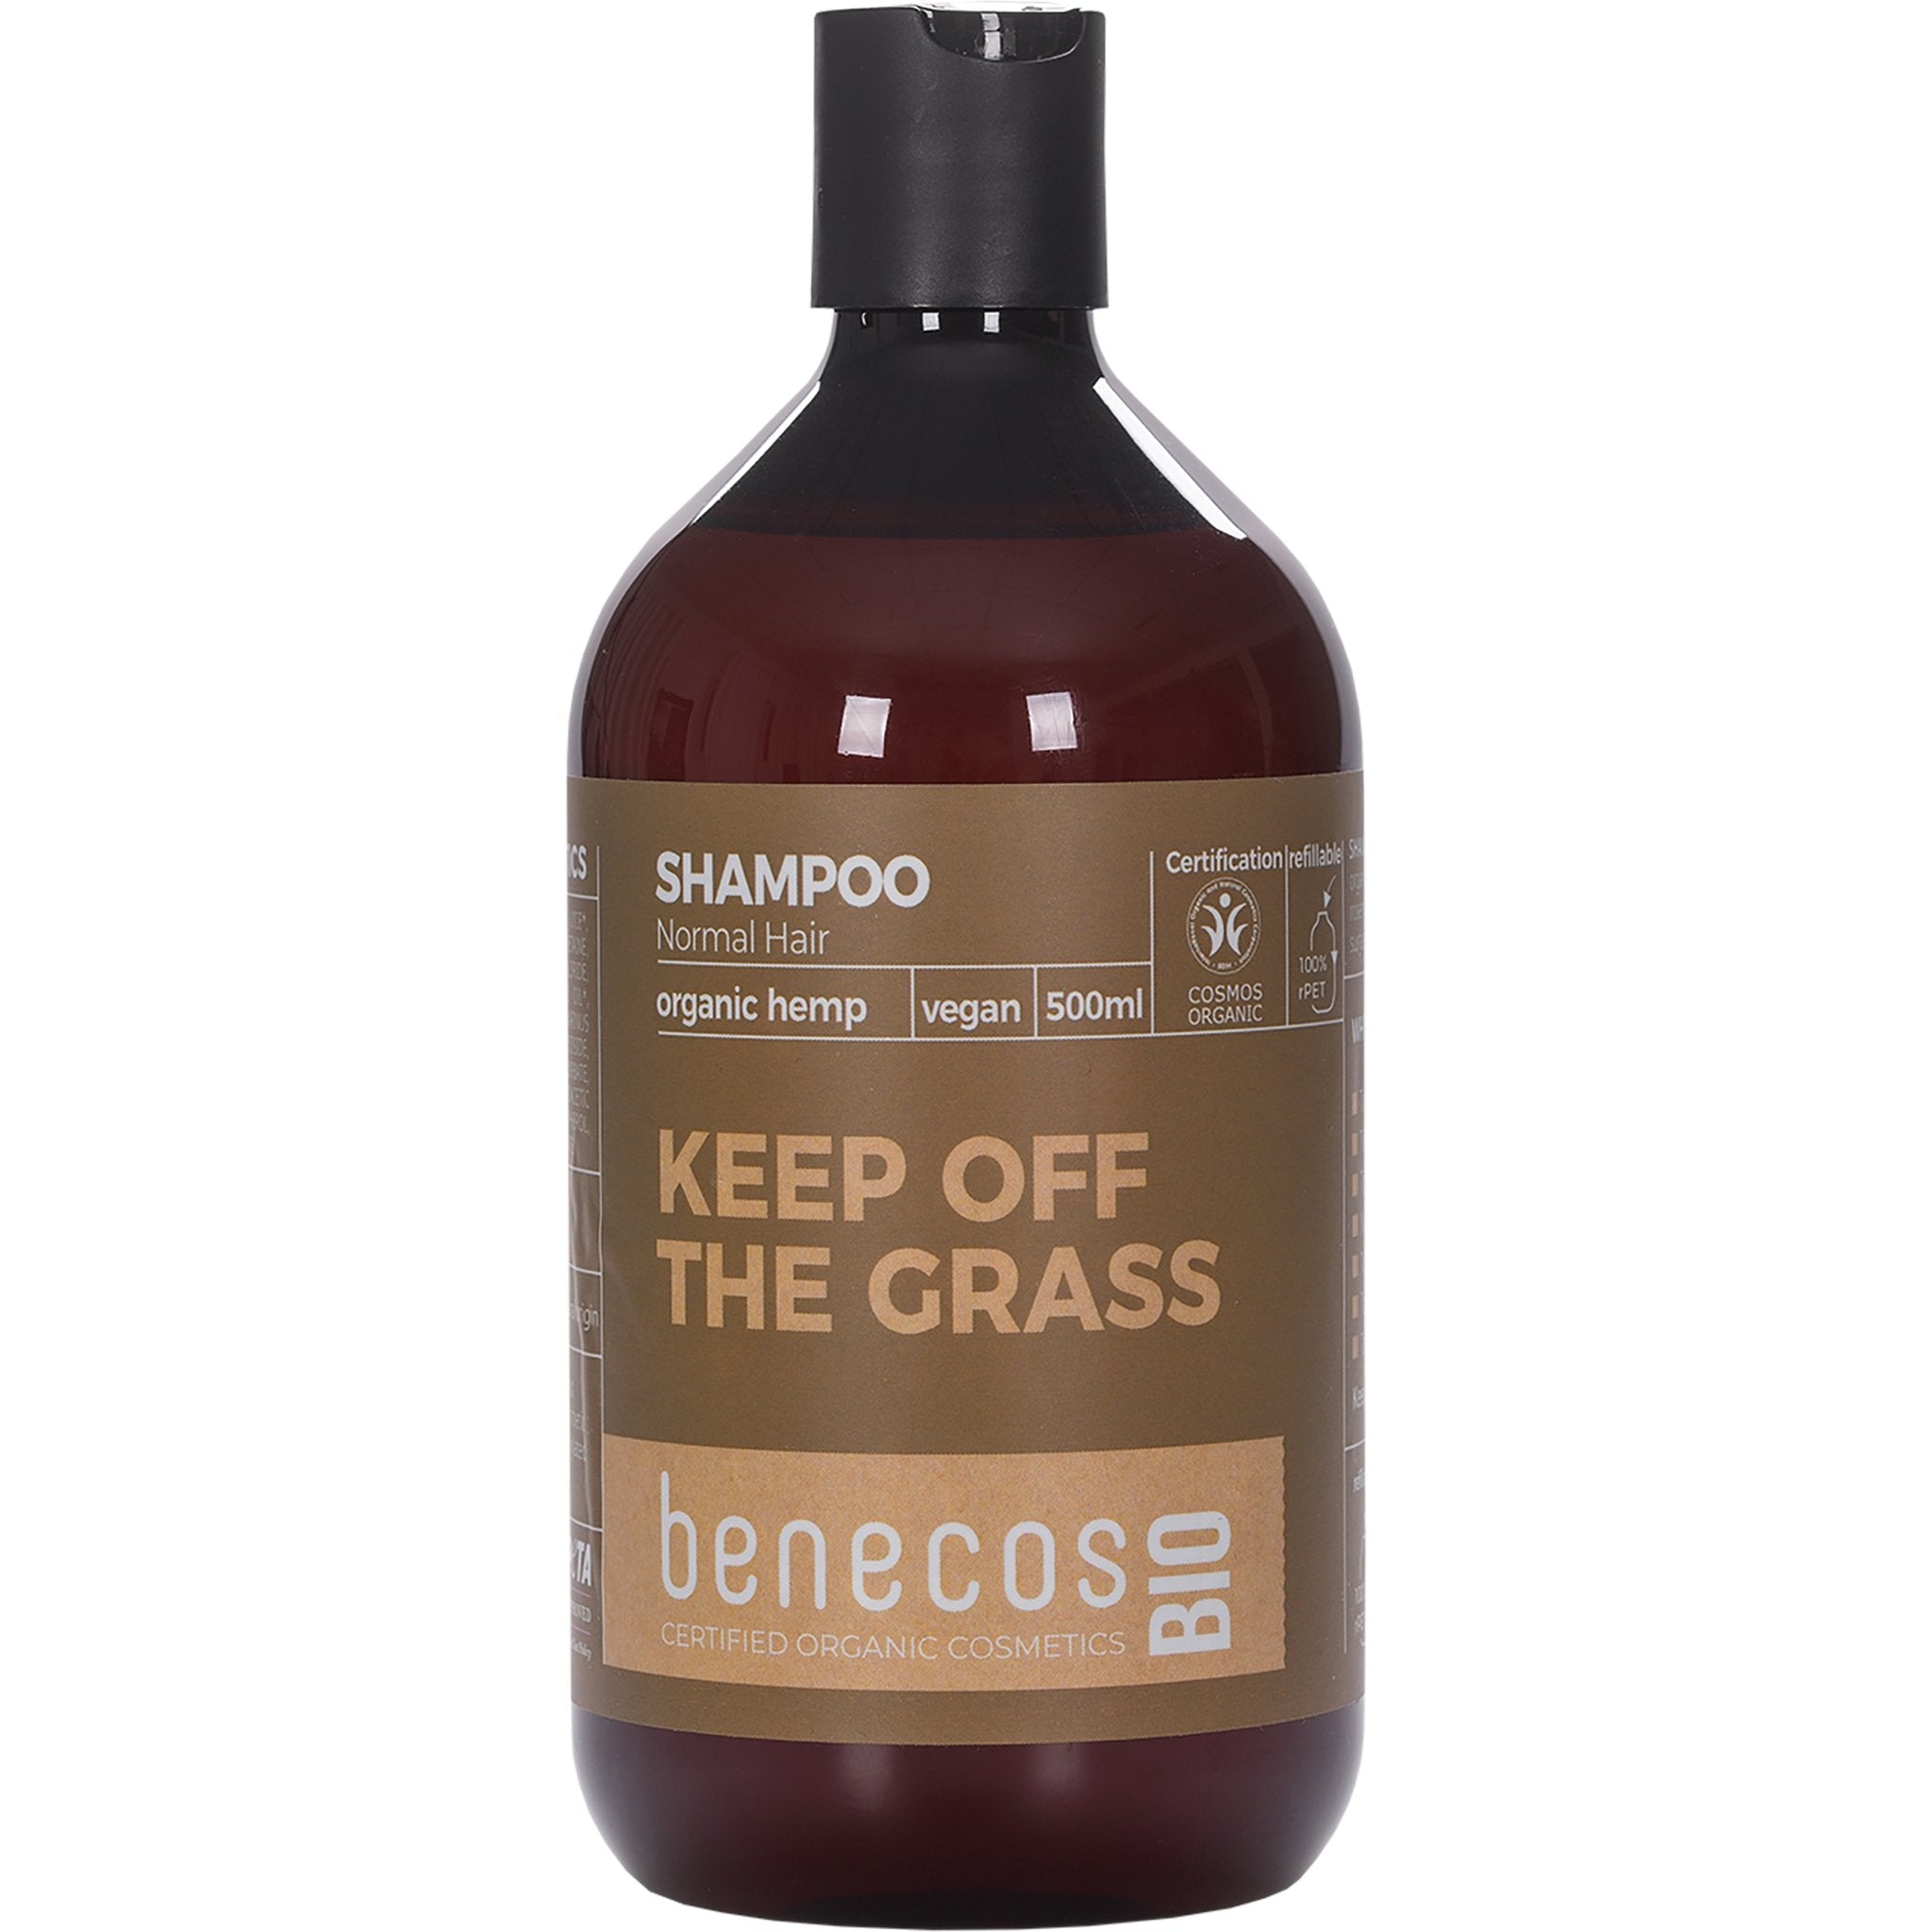 NEW Keep Off The Grass Shampoo - mypure.co.uk